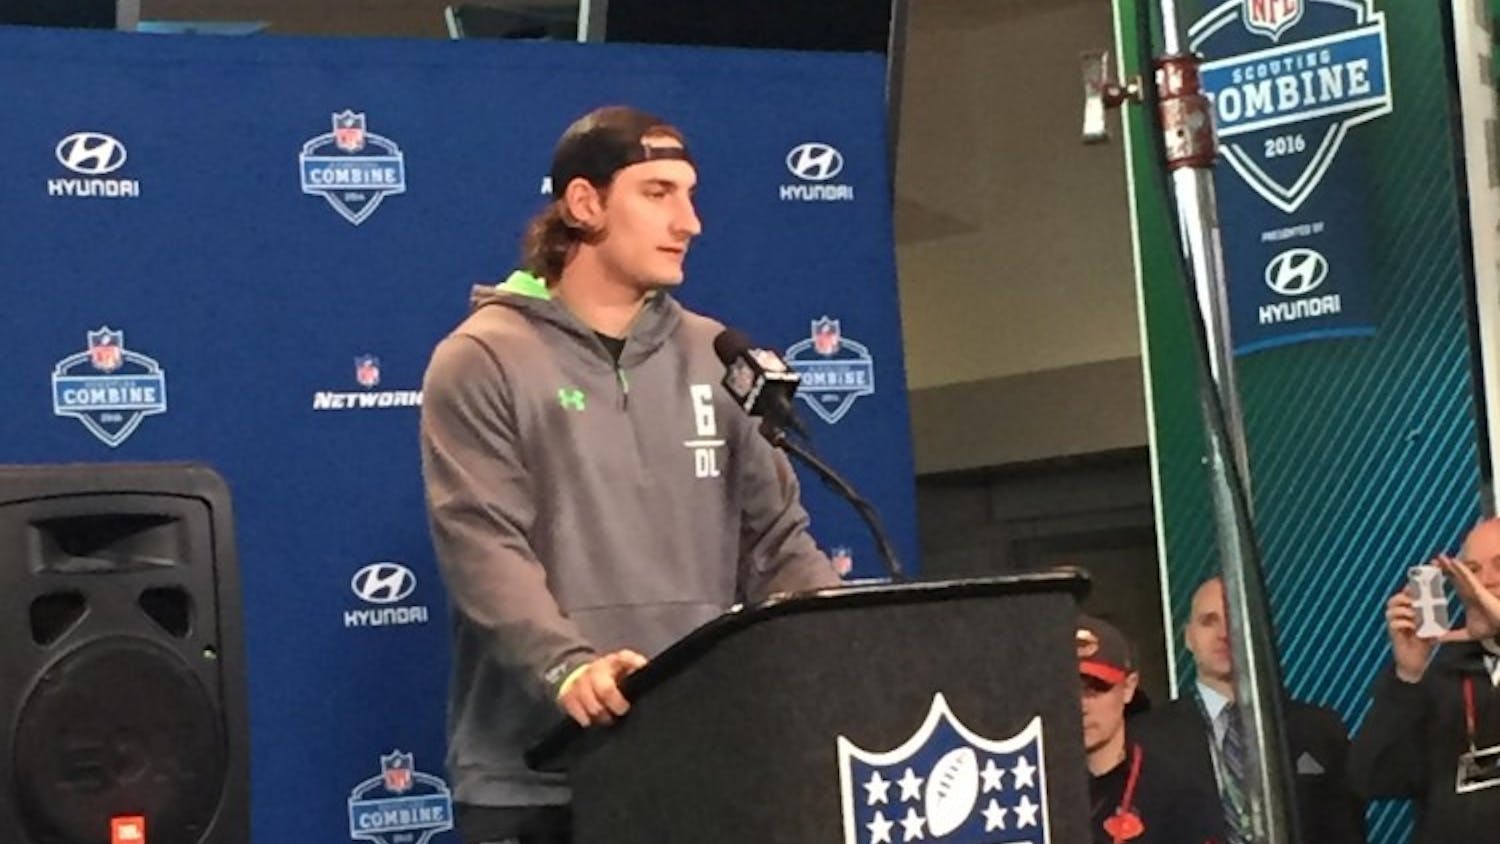 Ohio State defensive end Joey Bosa, a projected top ten pick in the draft, gave me my first taste of an NFL Combine press conference.